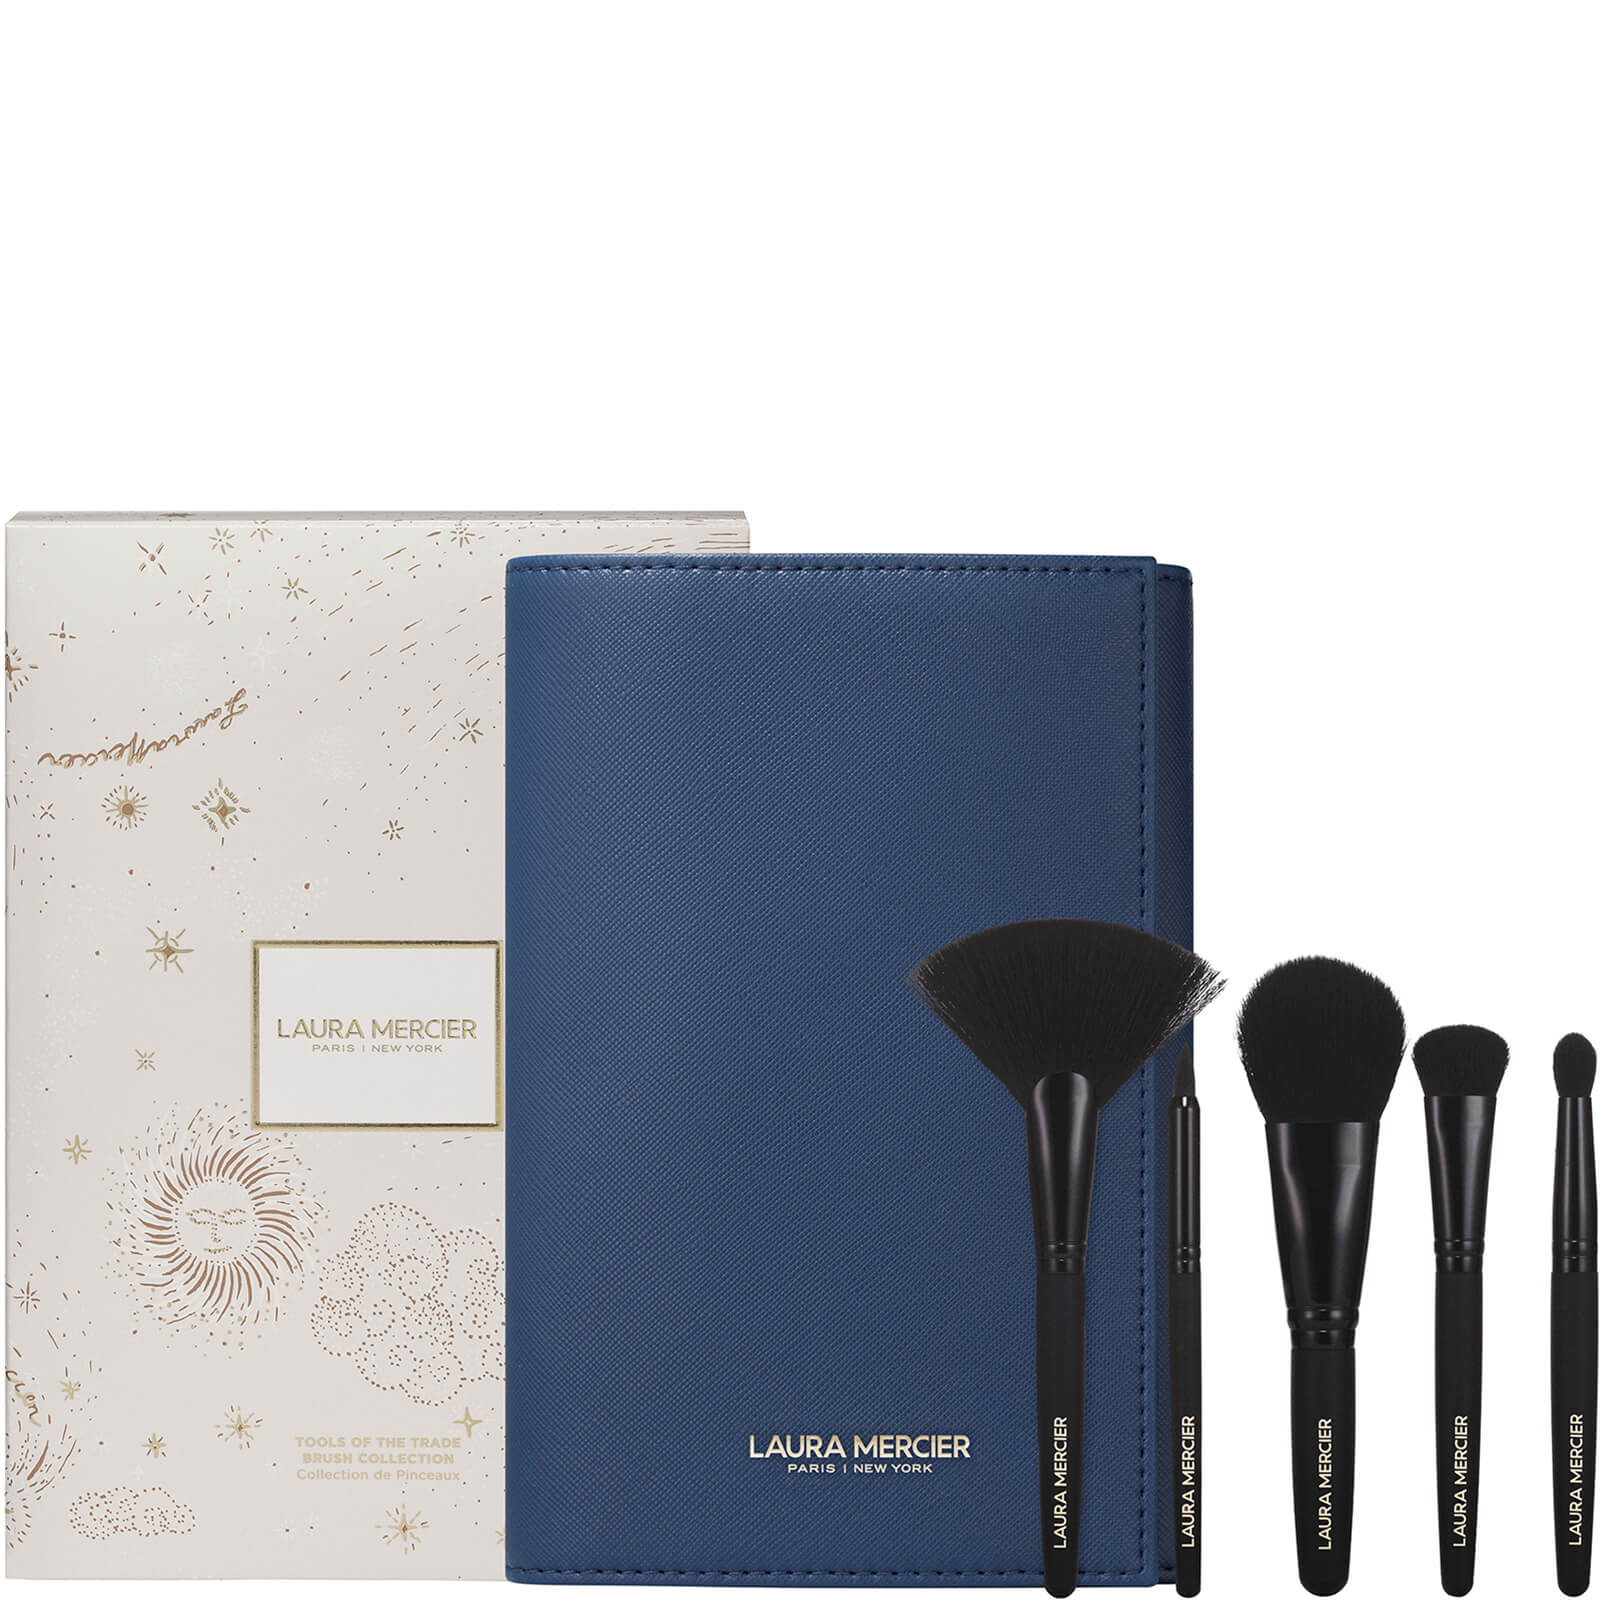 Laura Mercier Tools of the Trade Brush Collection (Worth £142.00)